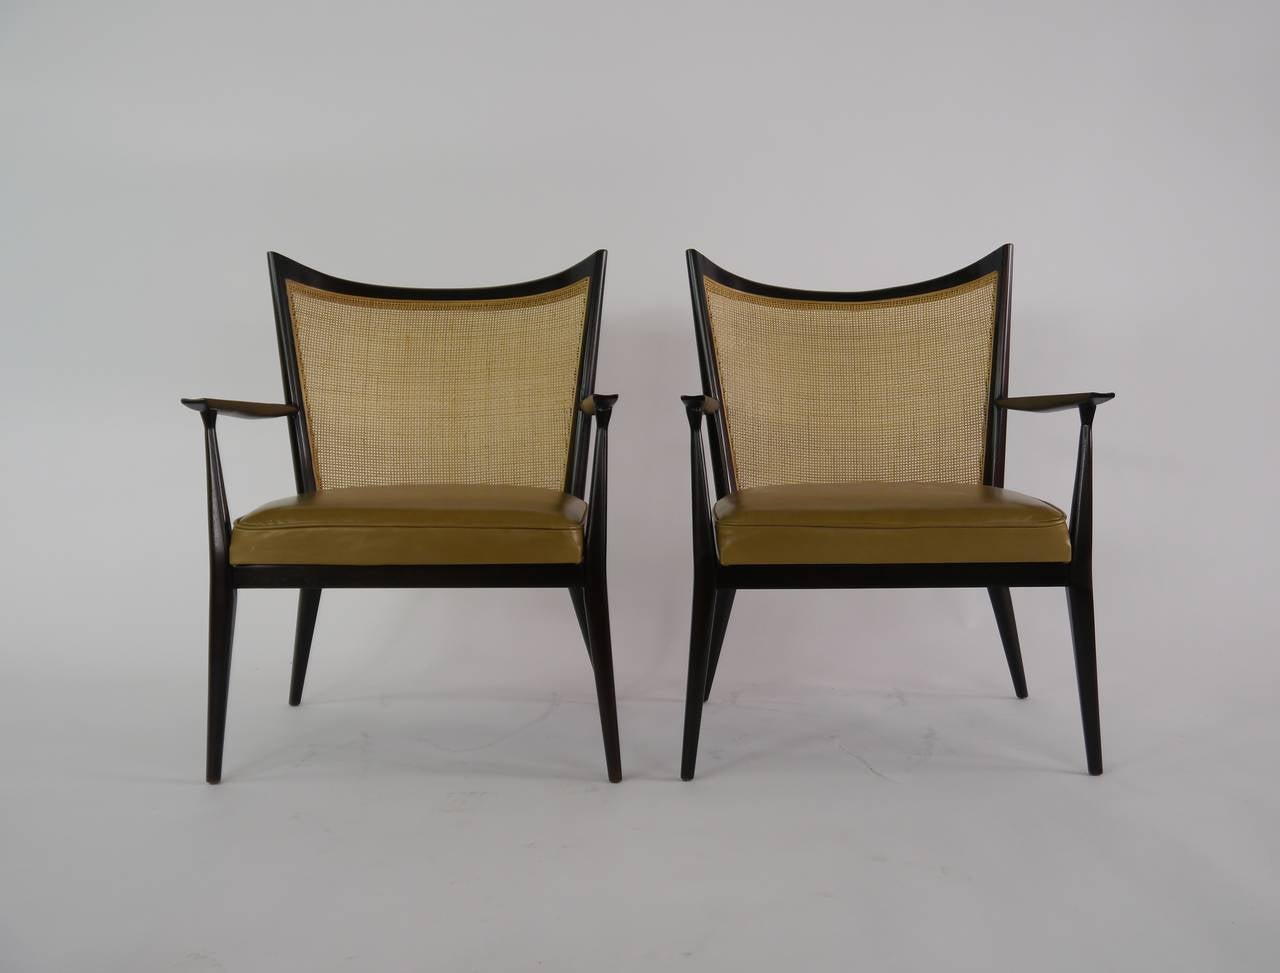 Elegant pair of lounge chairs in cane and leather by Paul McCobb for Directional. Recent reupholstery in leather, re caned and refinished.